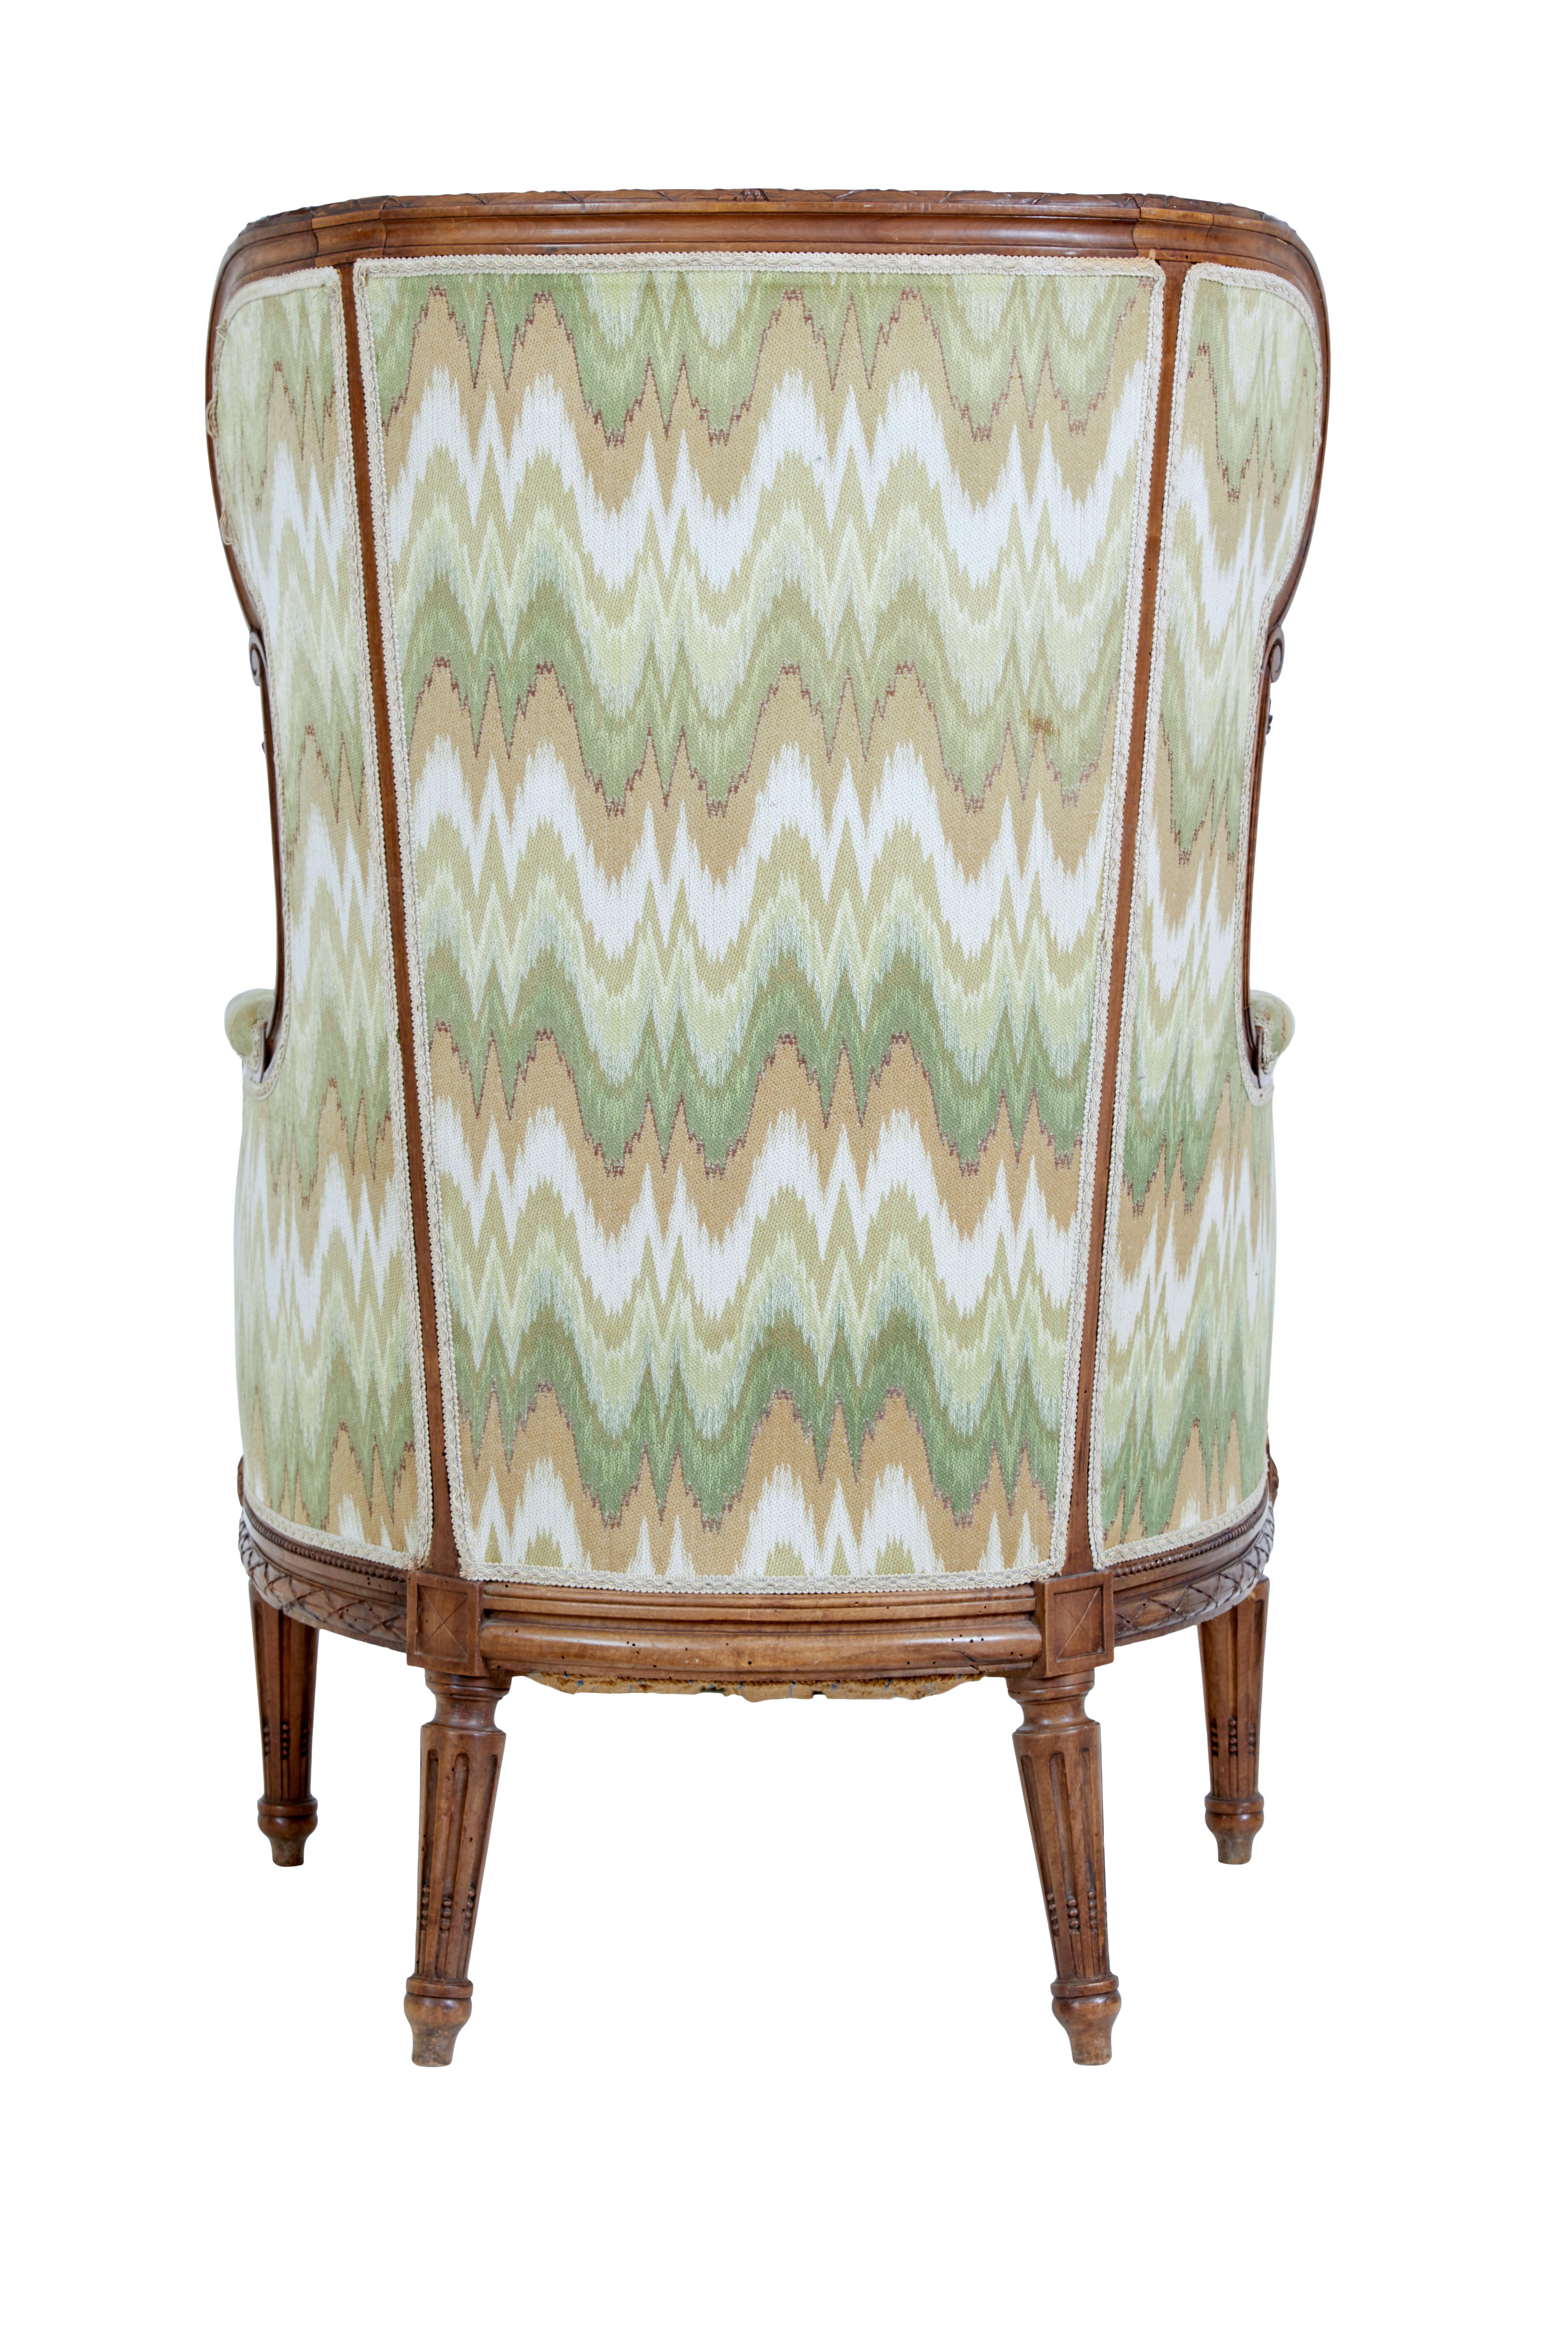 A French Louis XVI style walnut bergère à oreilles circa 1870 with carved décor and fluted legs. Transport yourself to the charm of 19th-century French décor with this Louis XVI style walnut wingback bergère chair, circa 1870. The hue of walnut and